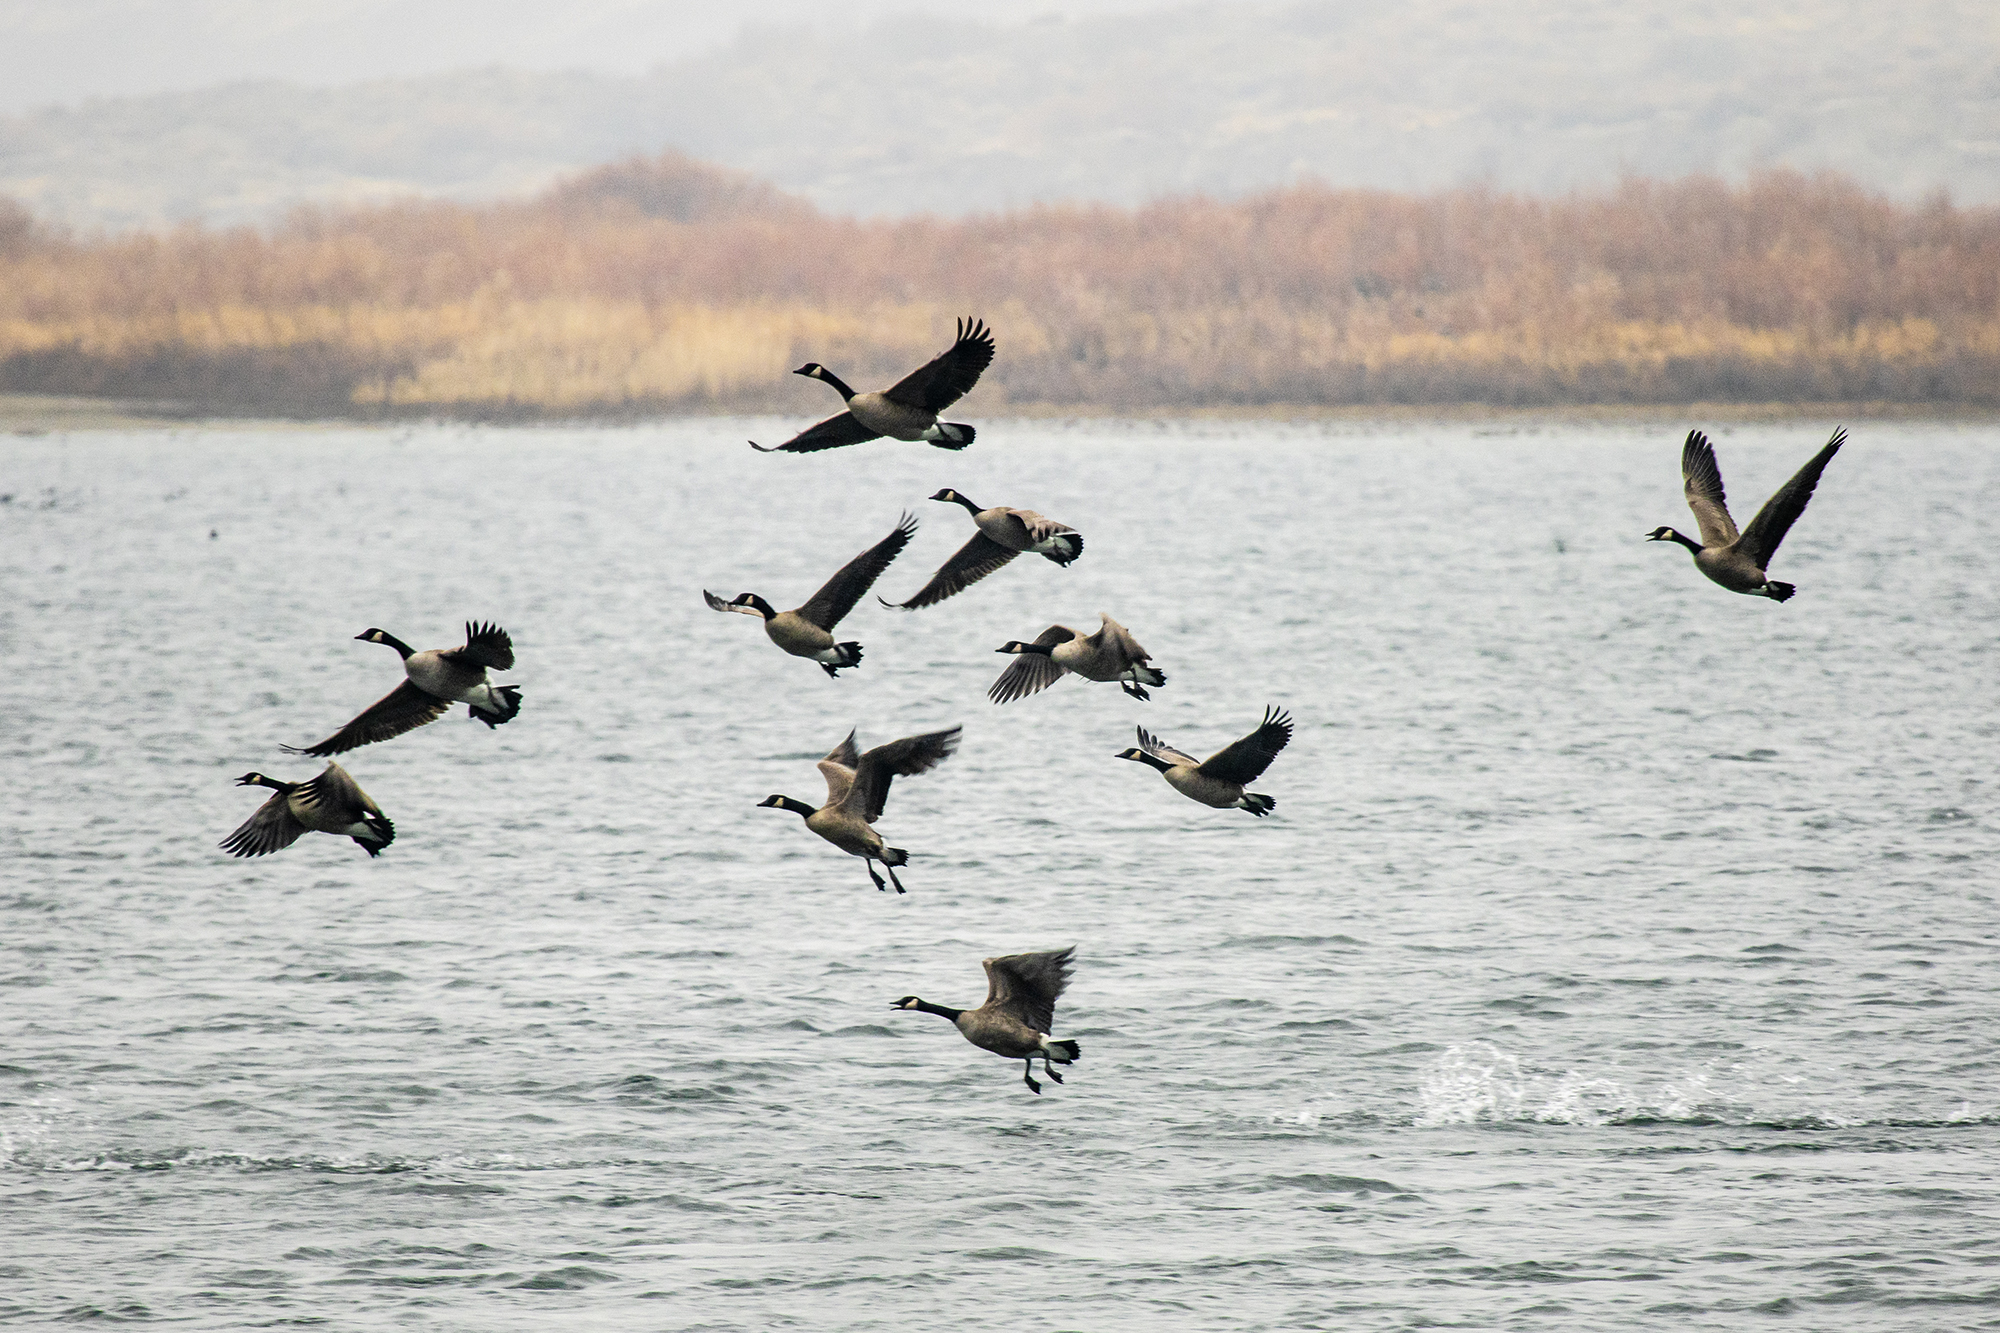 Canada geese on the Columbia River take flight from the Hanford Reach.